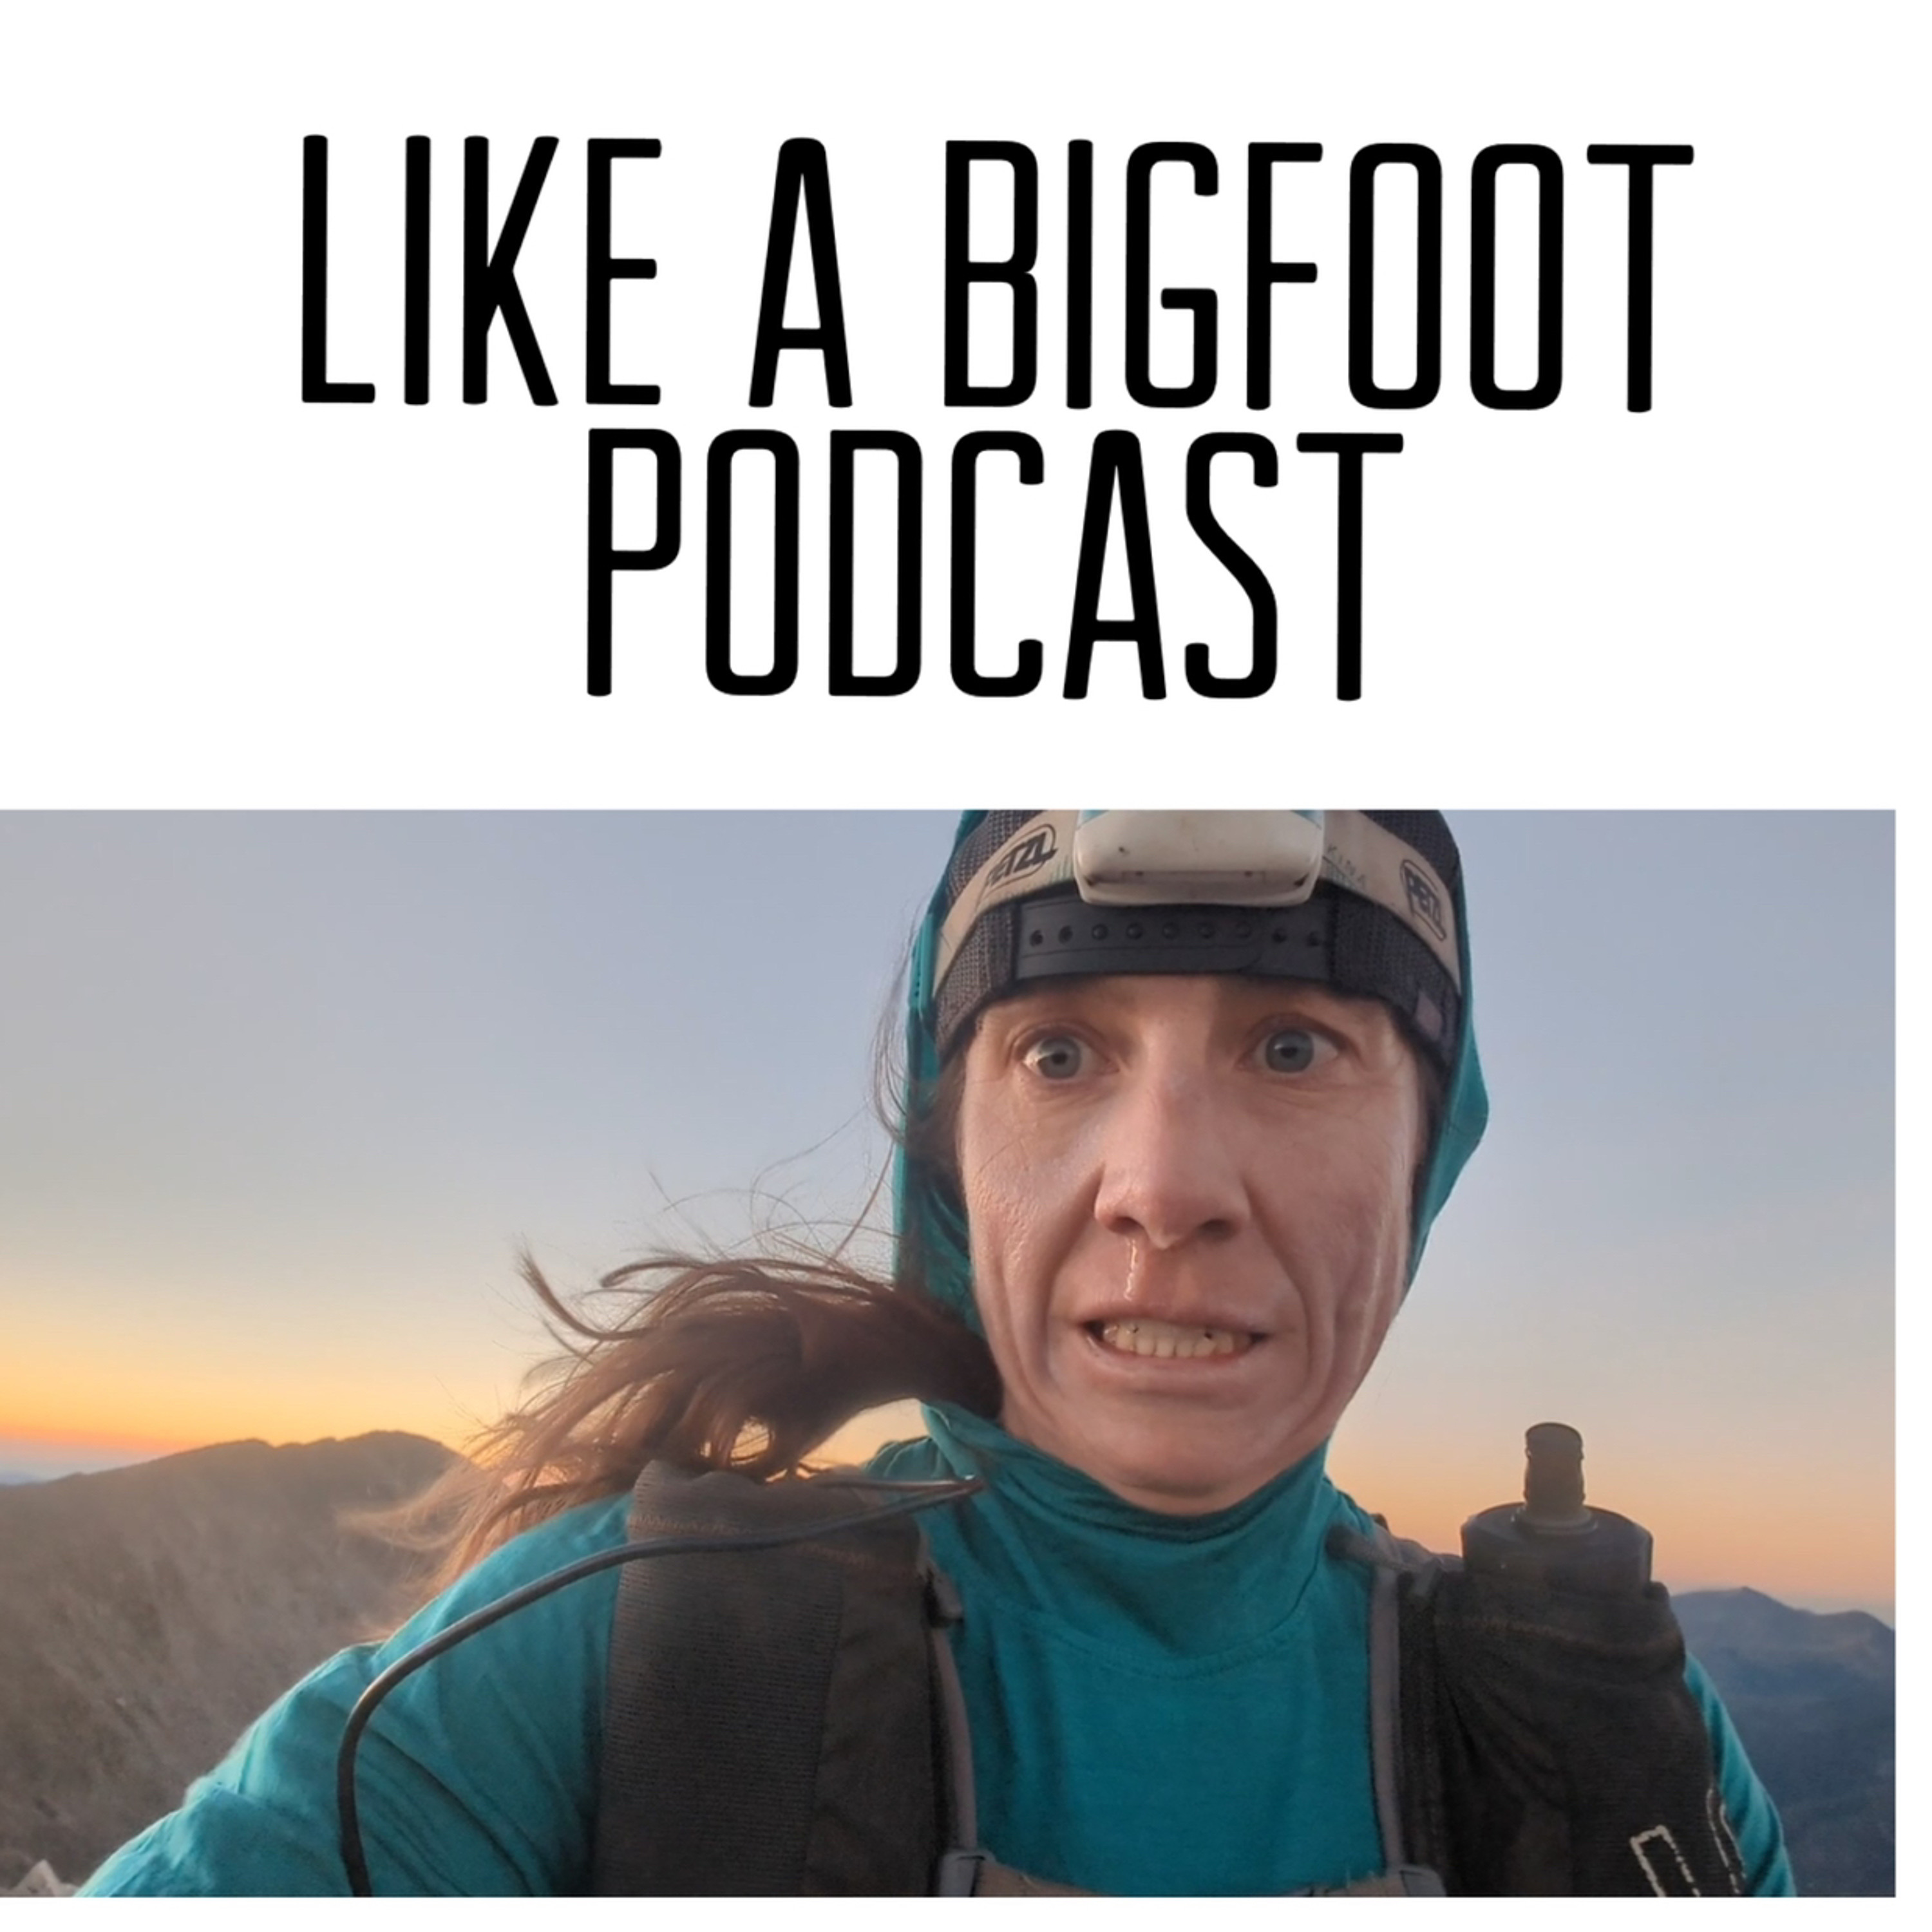 #352: Eszter Horanyi 2 -- The Tale of Her New Unsupported Nolan’s 14 FKT